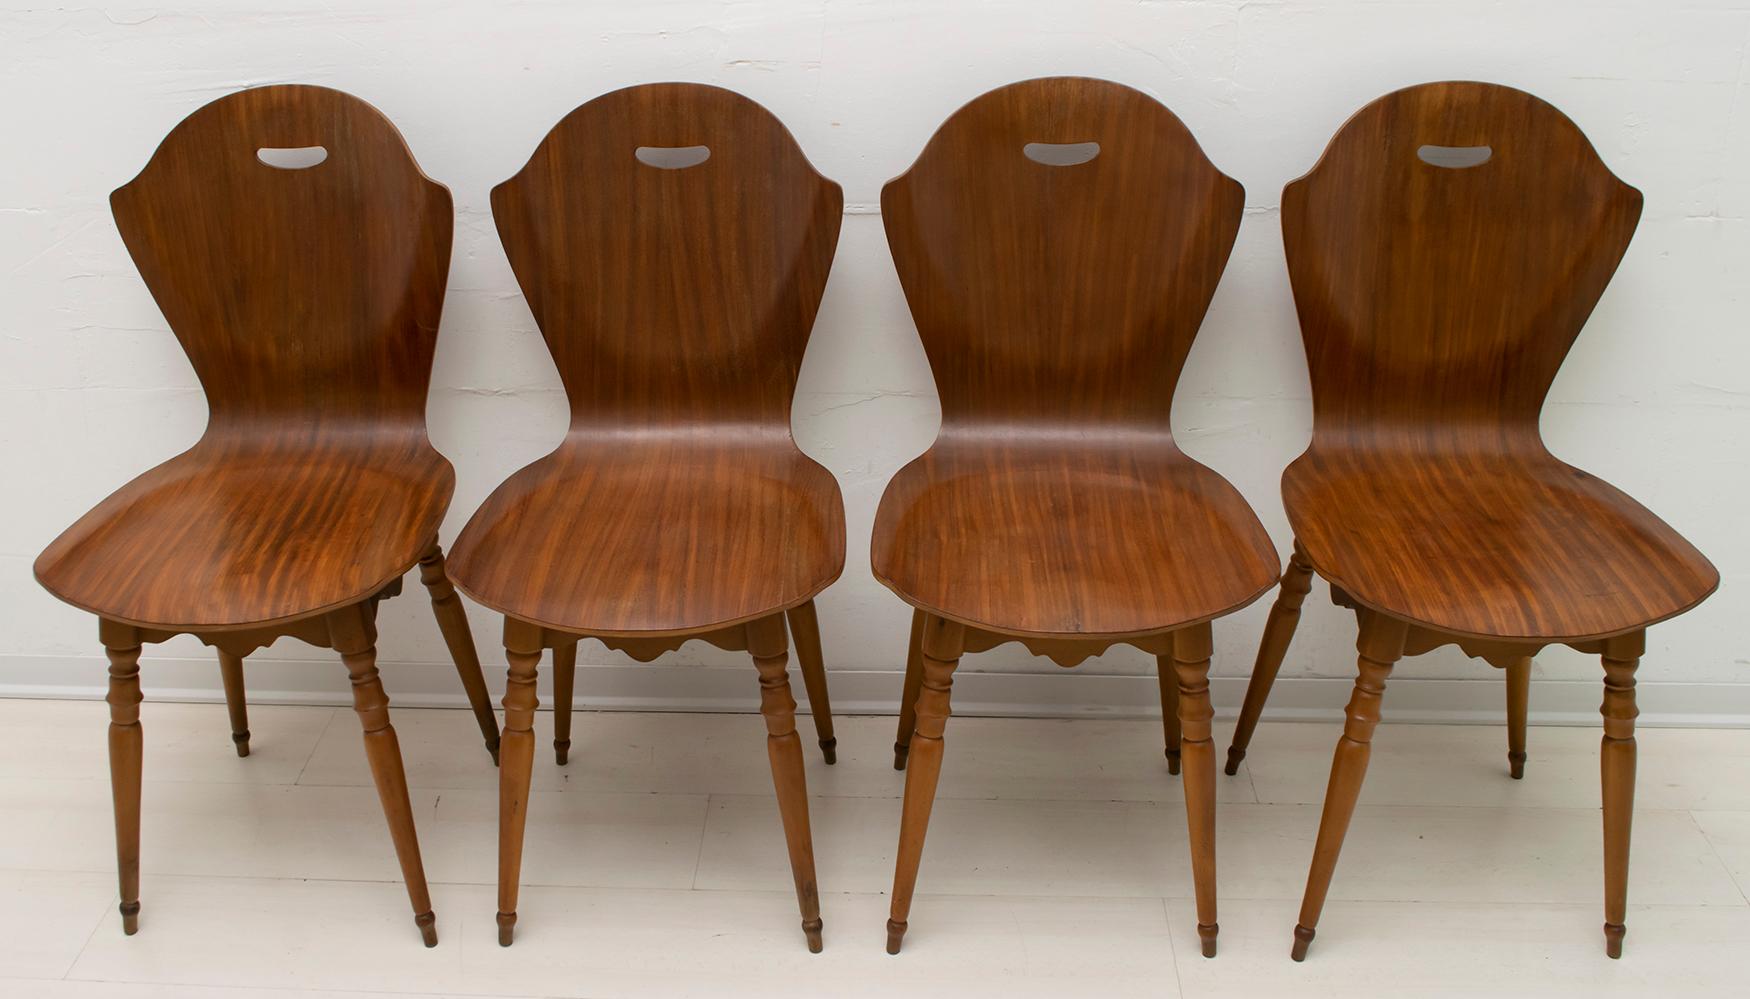 Four original chairs in curved multilayer teak and beech wood, mid-century Italian design in the Carlo Ratti style.